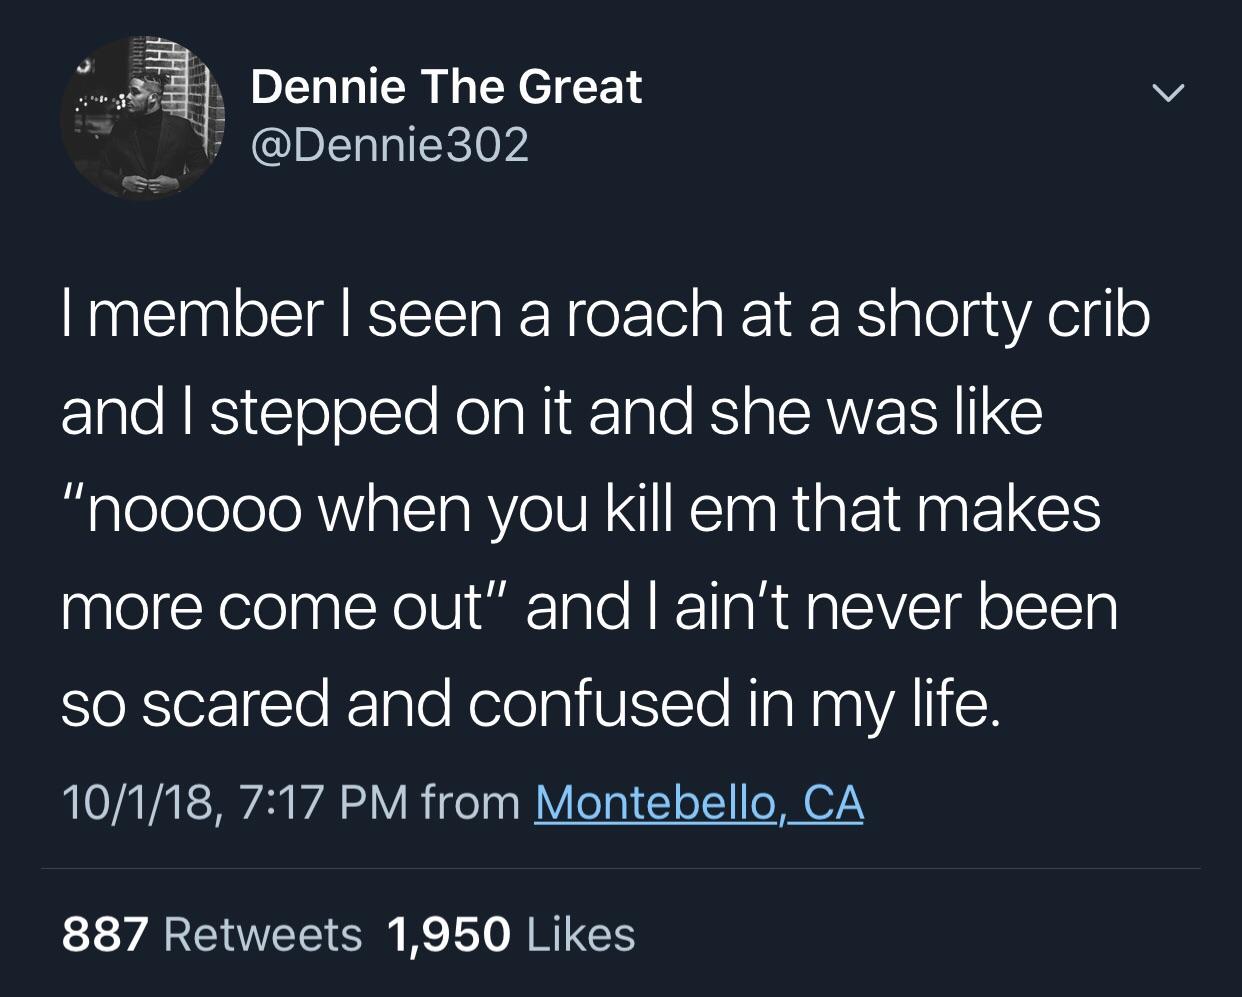 atmosphere - Dennie The Great 302 Tmember I seen a roach at a shorty crib and I stepped on it and she was "nooooo when you kill em that makes more come out" and I ain't never been so scared and confused in my life. 10118, from Montebello, Ca 887 1,950